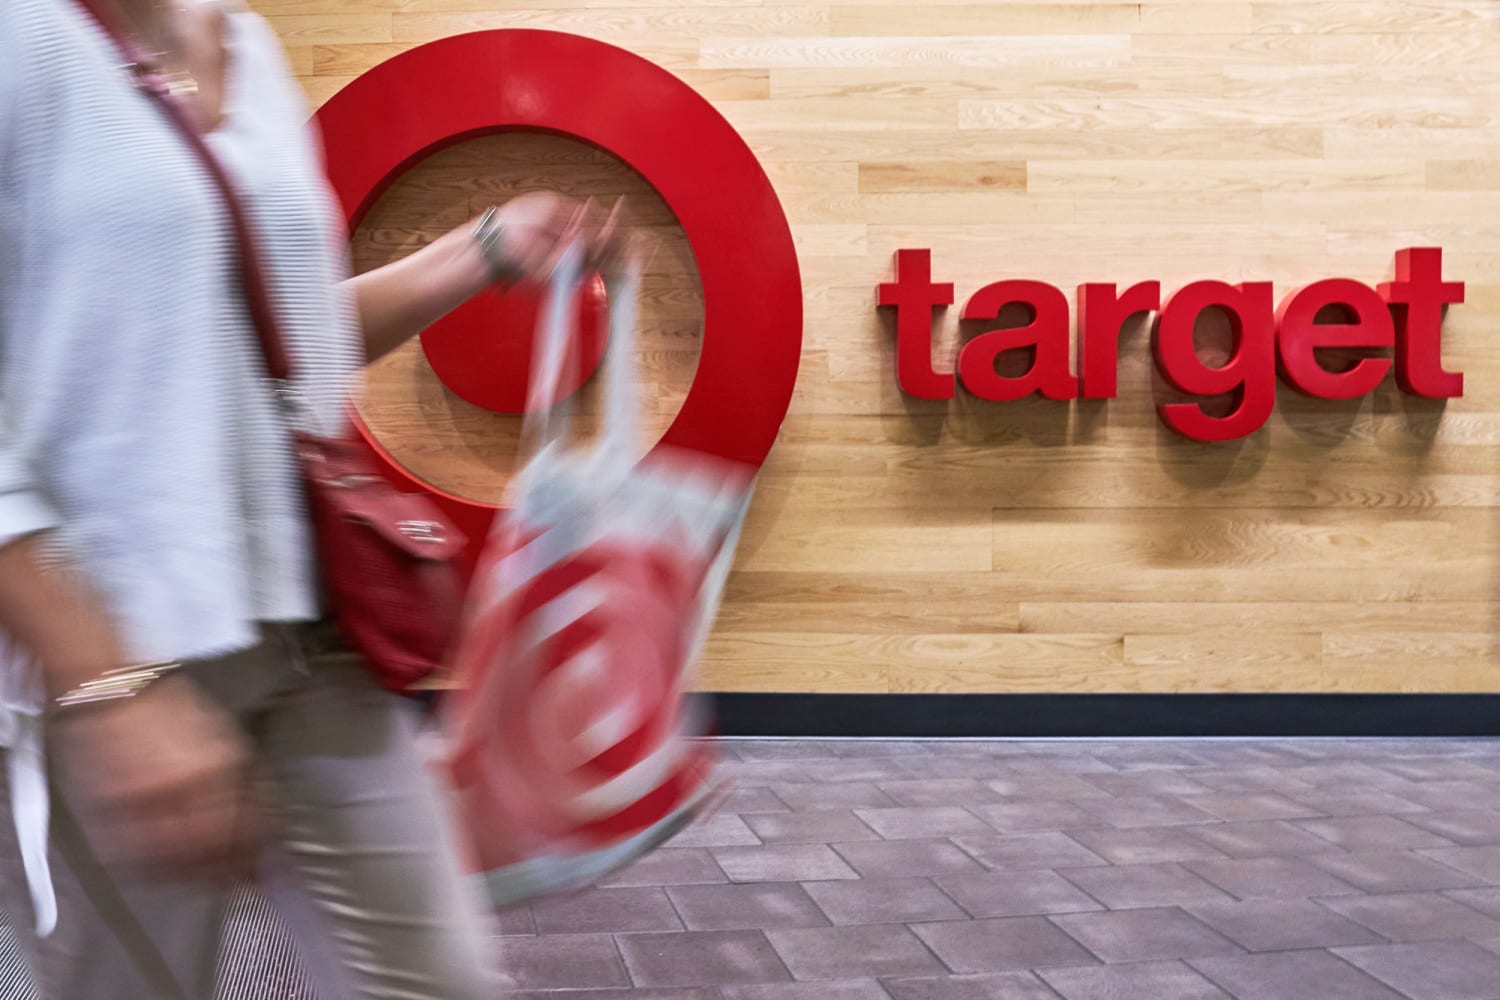 Target has stopped selling the product dedicated to civil rights icons after a TikTok video showed errors